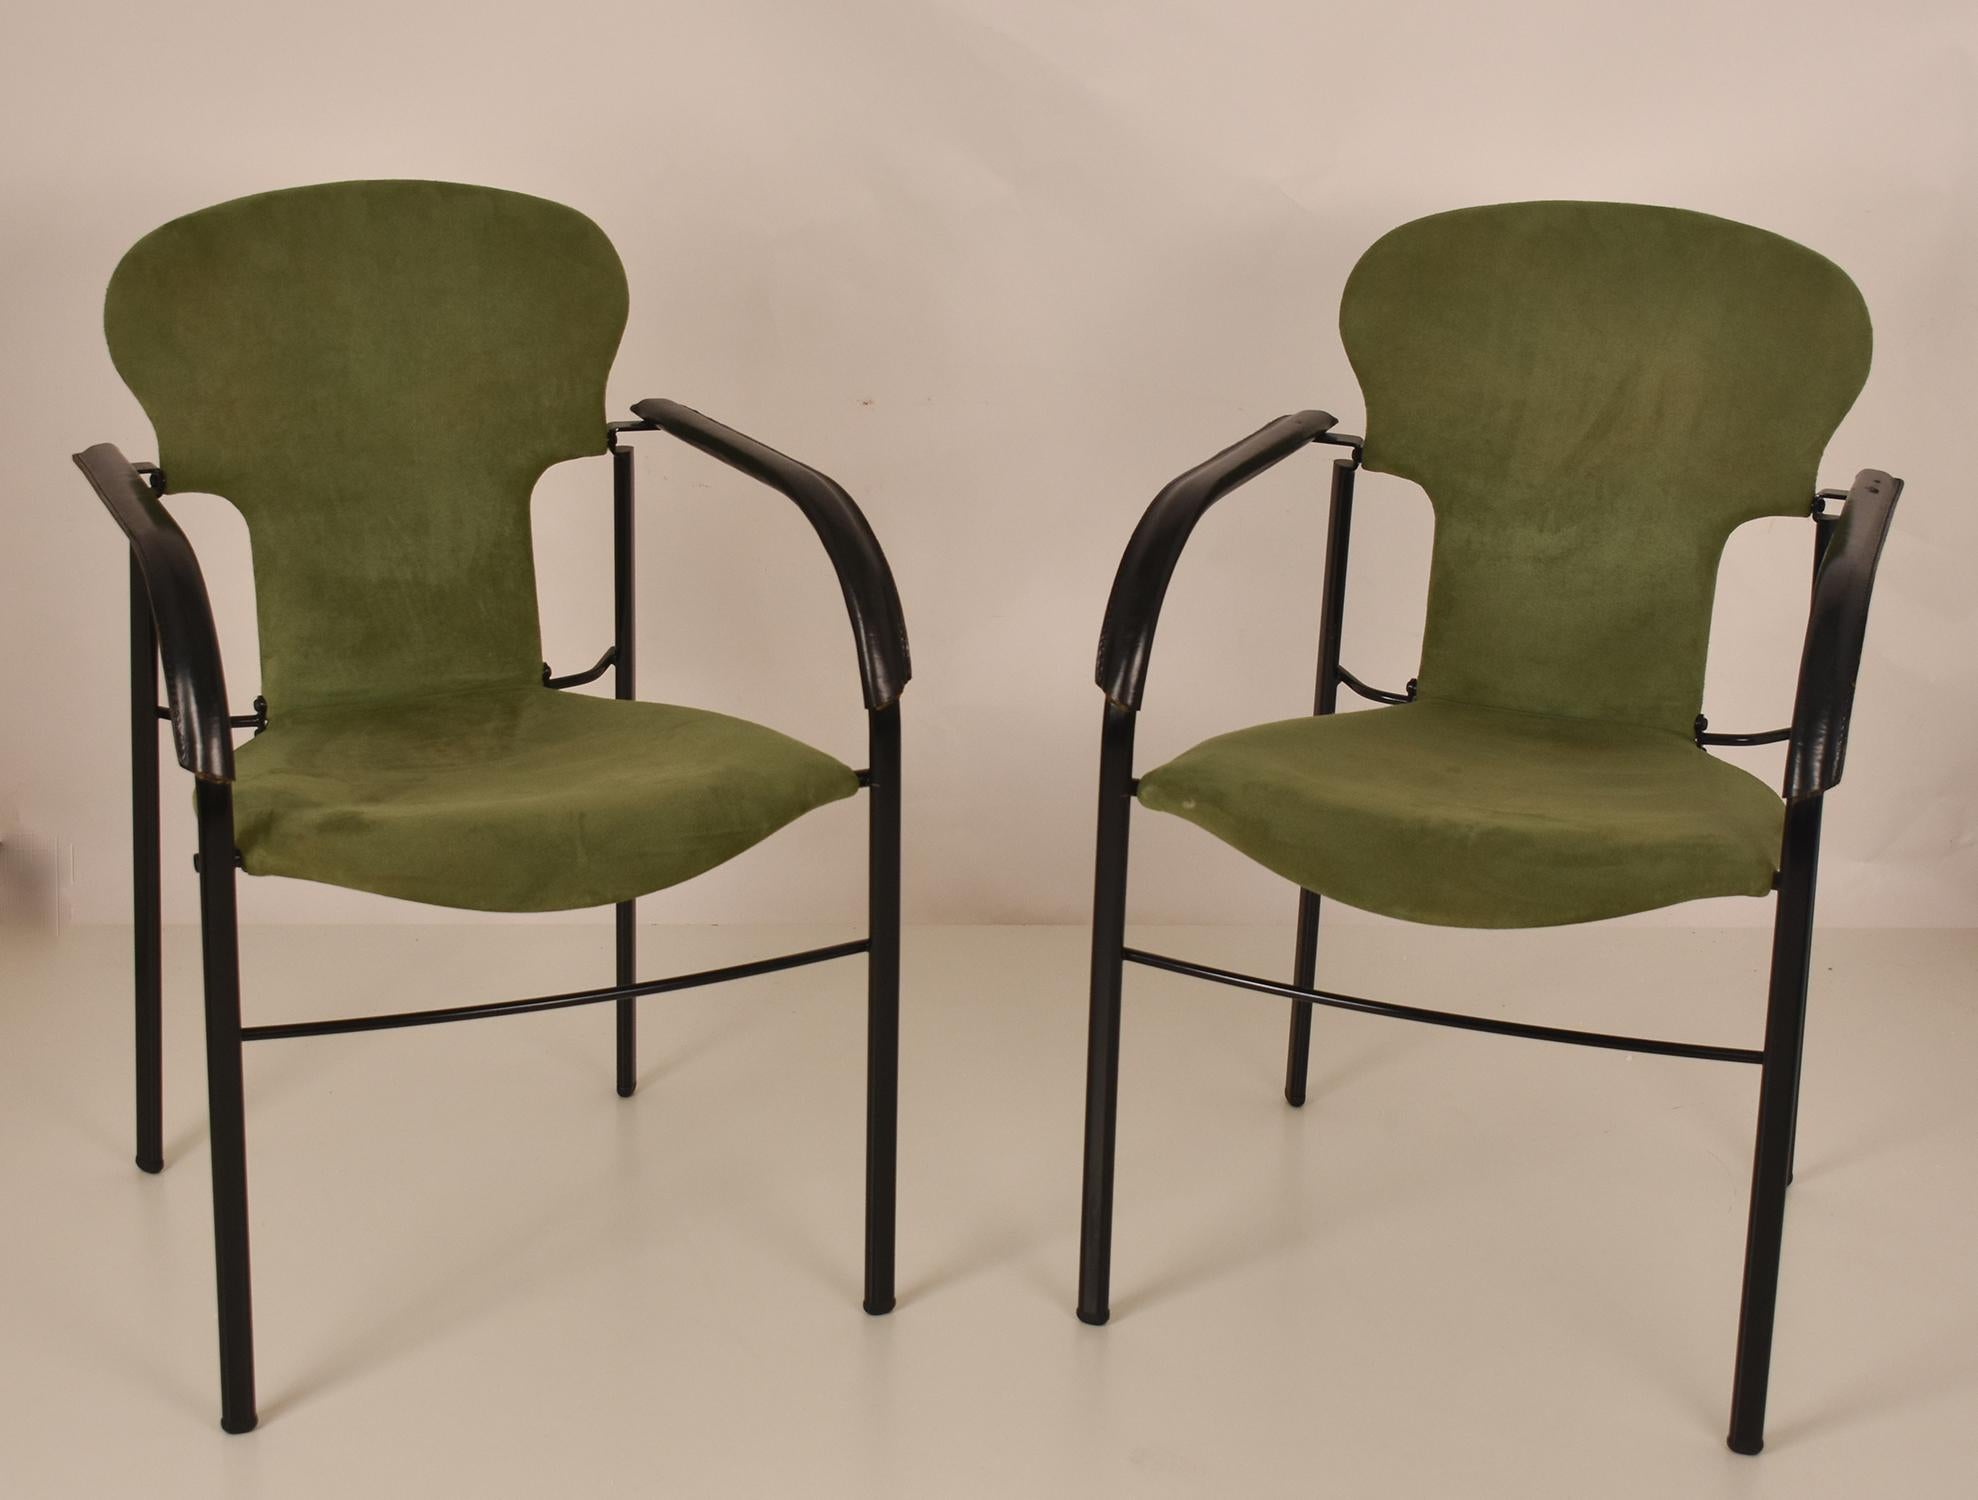 Pair of Varius  chair designed by Óscar Tusquets and produced by Casas in 1983.
This piece was the first chair designed by architect Oscar Tusquets. A chair inspired by the shape of a bent violin, composing seat and backrest
The structure of the